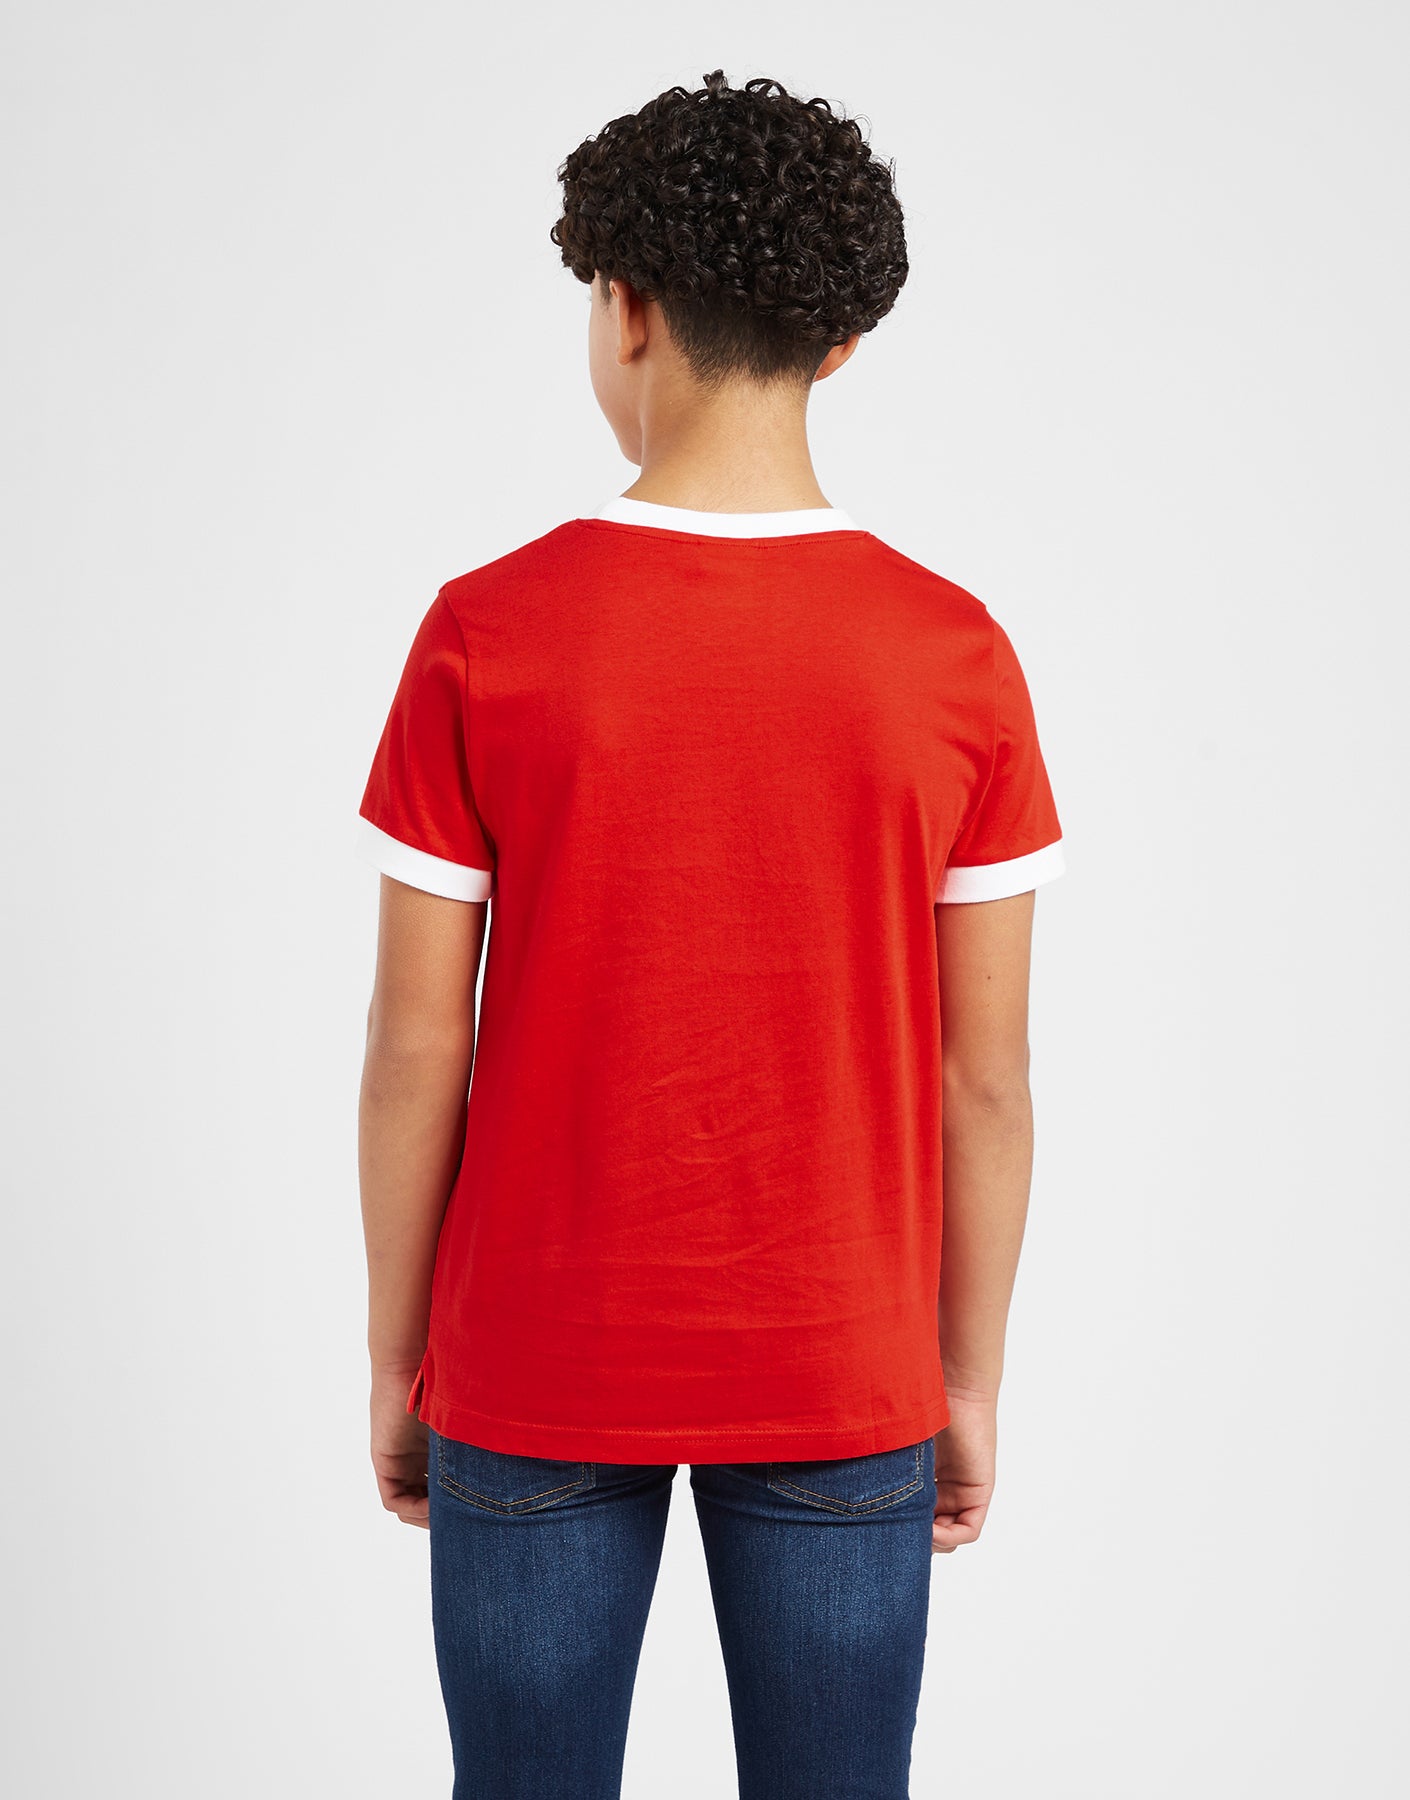 Official Team Wales Kids Ringer T-Shirt - Red